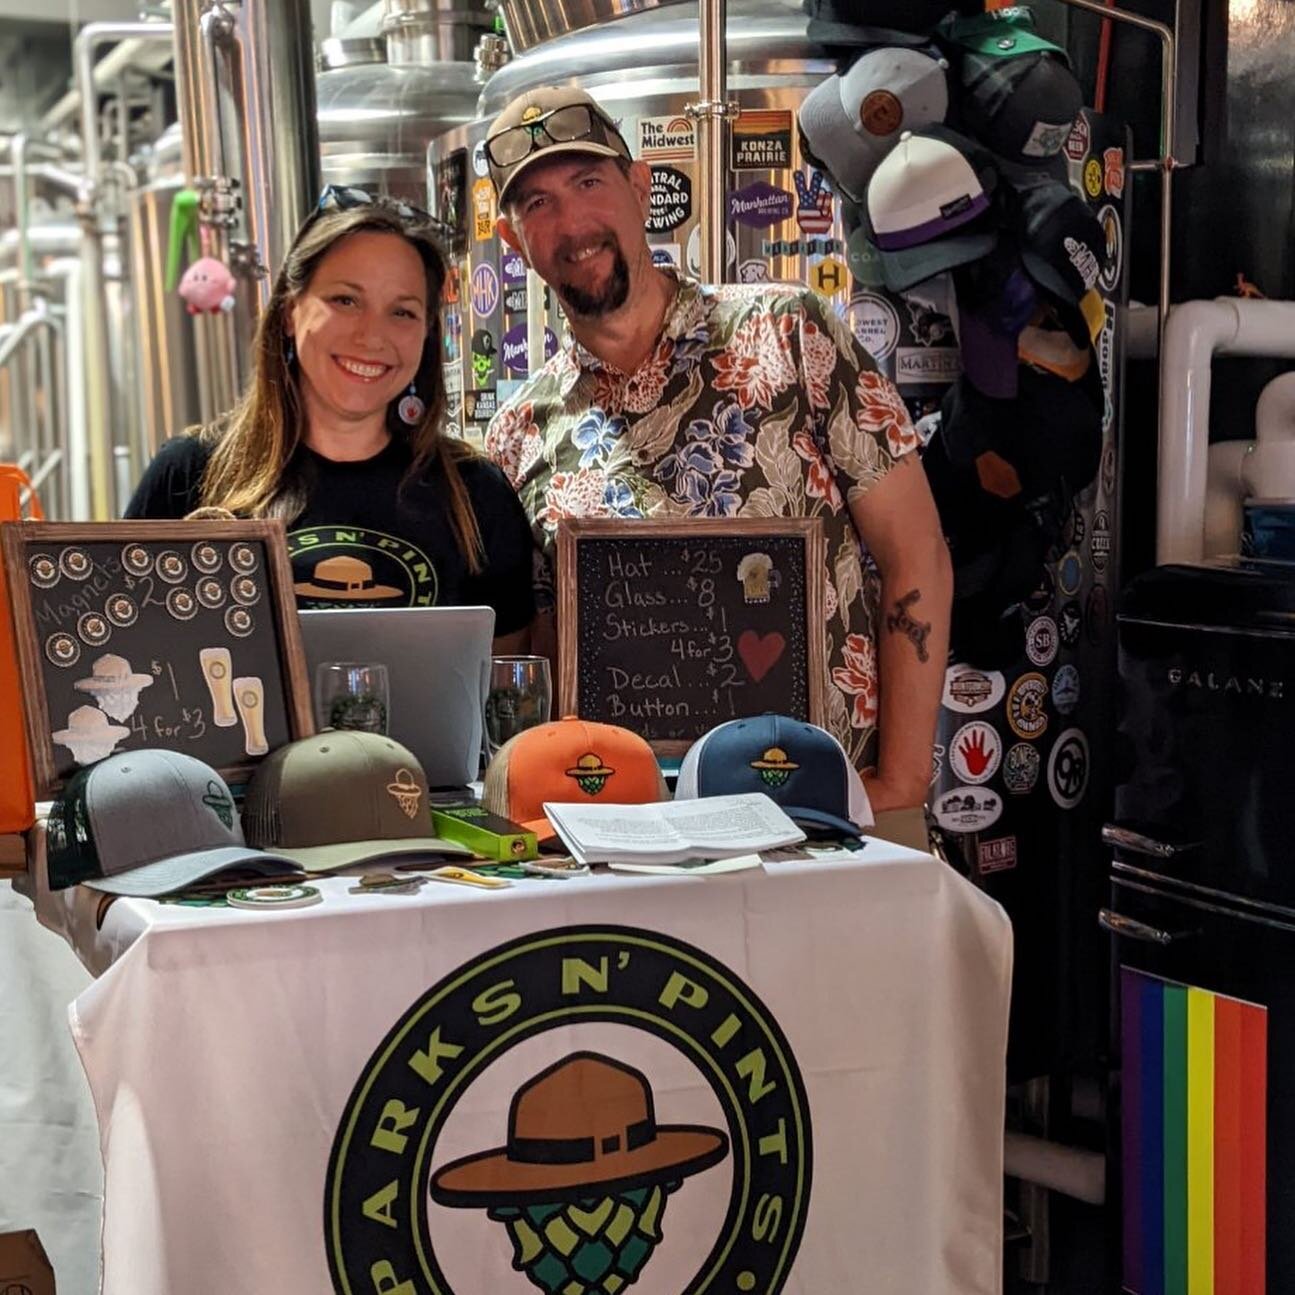 HUGE thanks to @manhattanbrewing for letting us host another Earth Day trivia! And big thanks to @arrowcoffeeco and @thedoughbromhk for donating merch for prizes! Everyone had a blast, we can&rsquo;t wait to do it again 🍻🍻🍻
.
.
Parksnpints.com
.
.